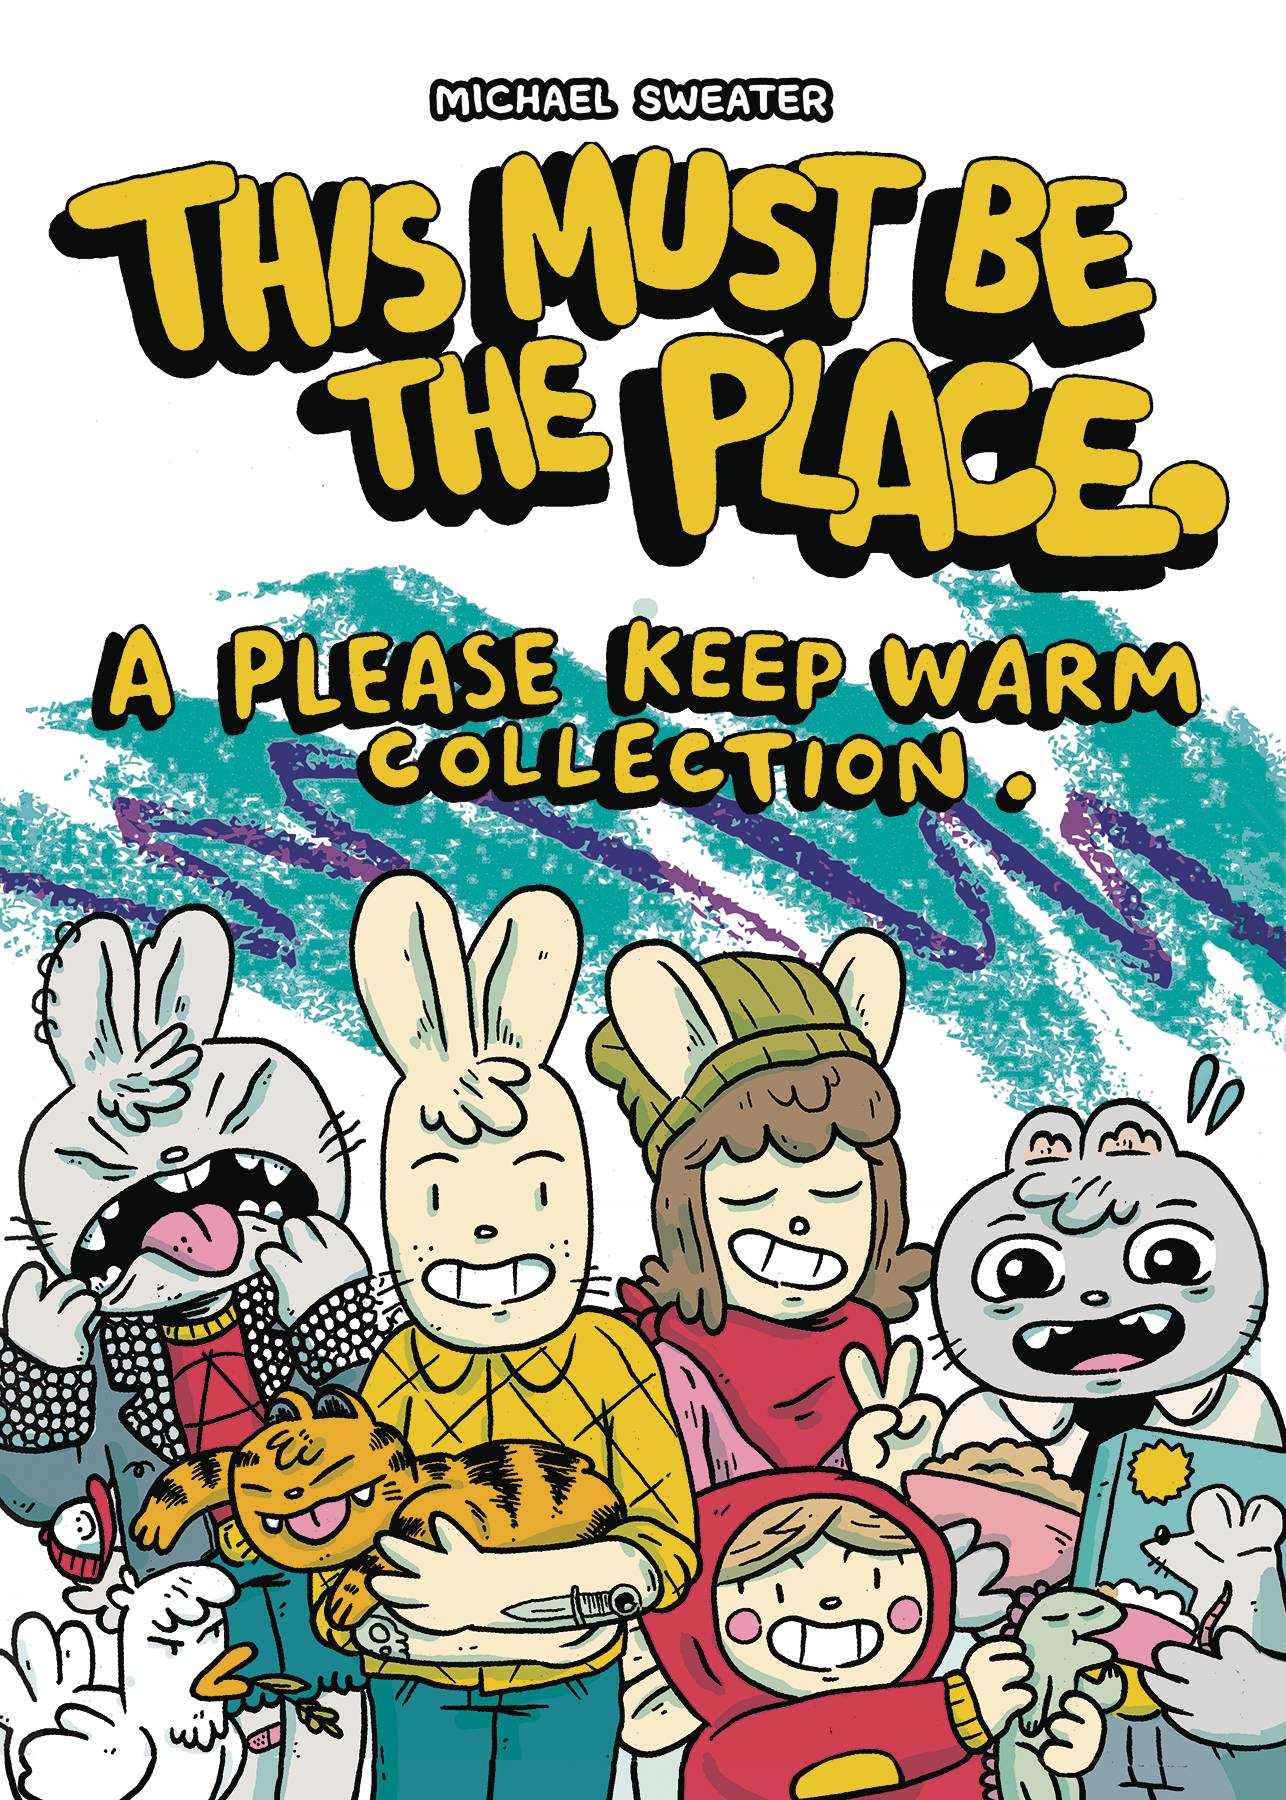 PLEASE KEEP WARM COLLECTION GN VOL 01 THIS MUST BE PLACE